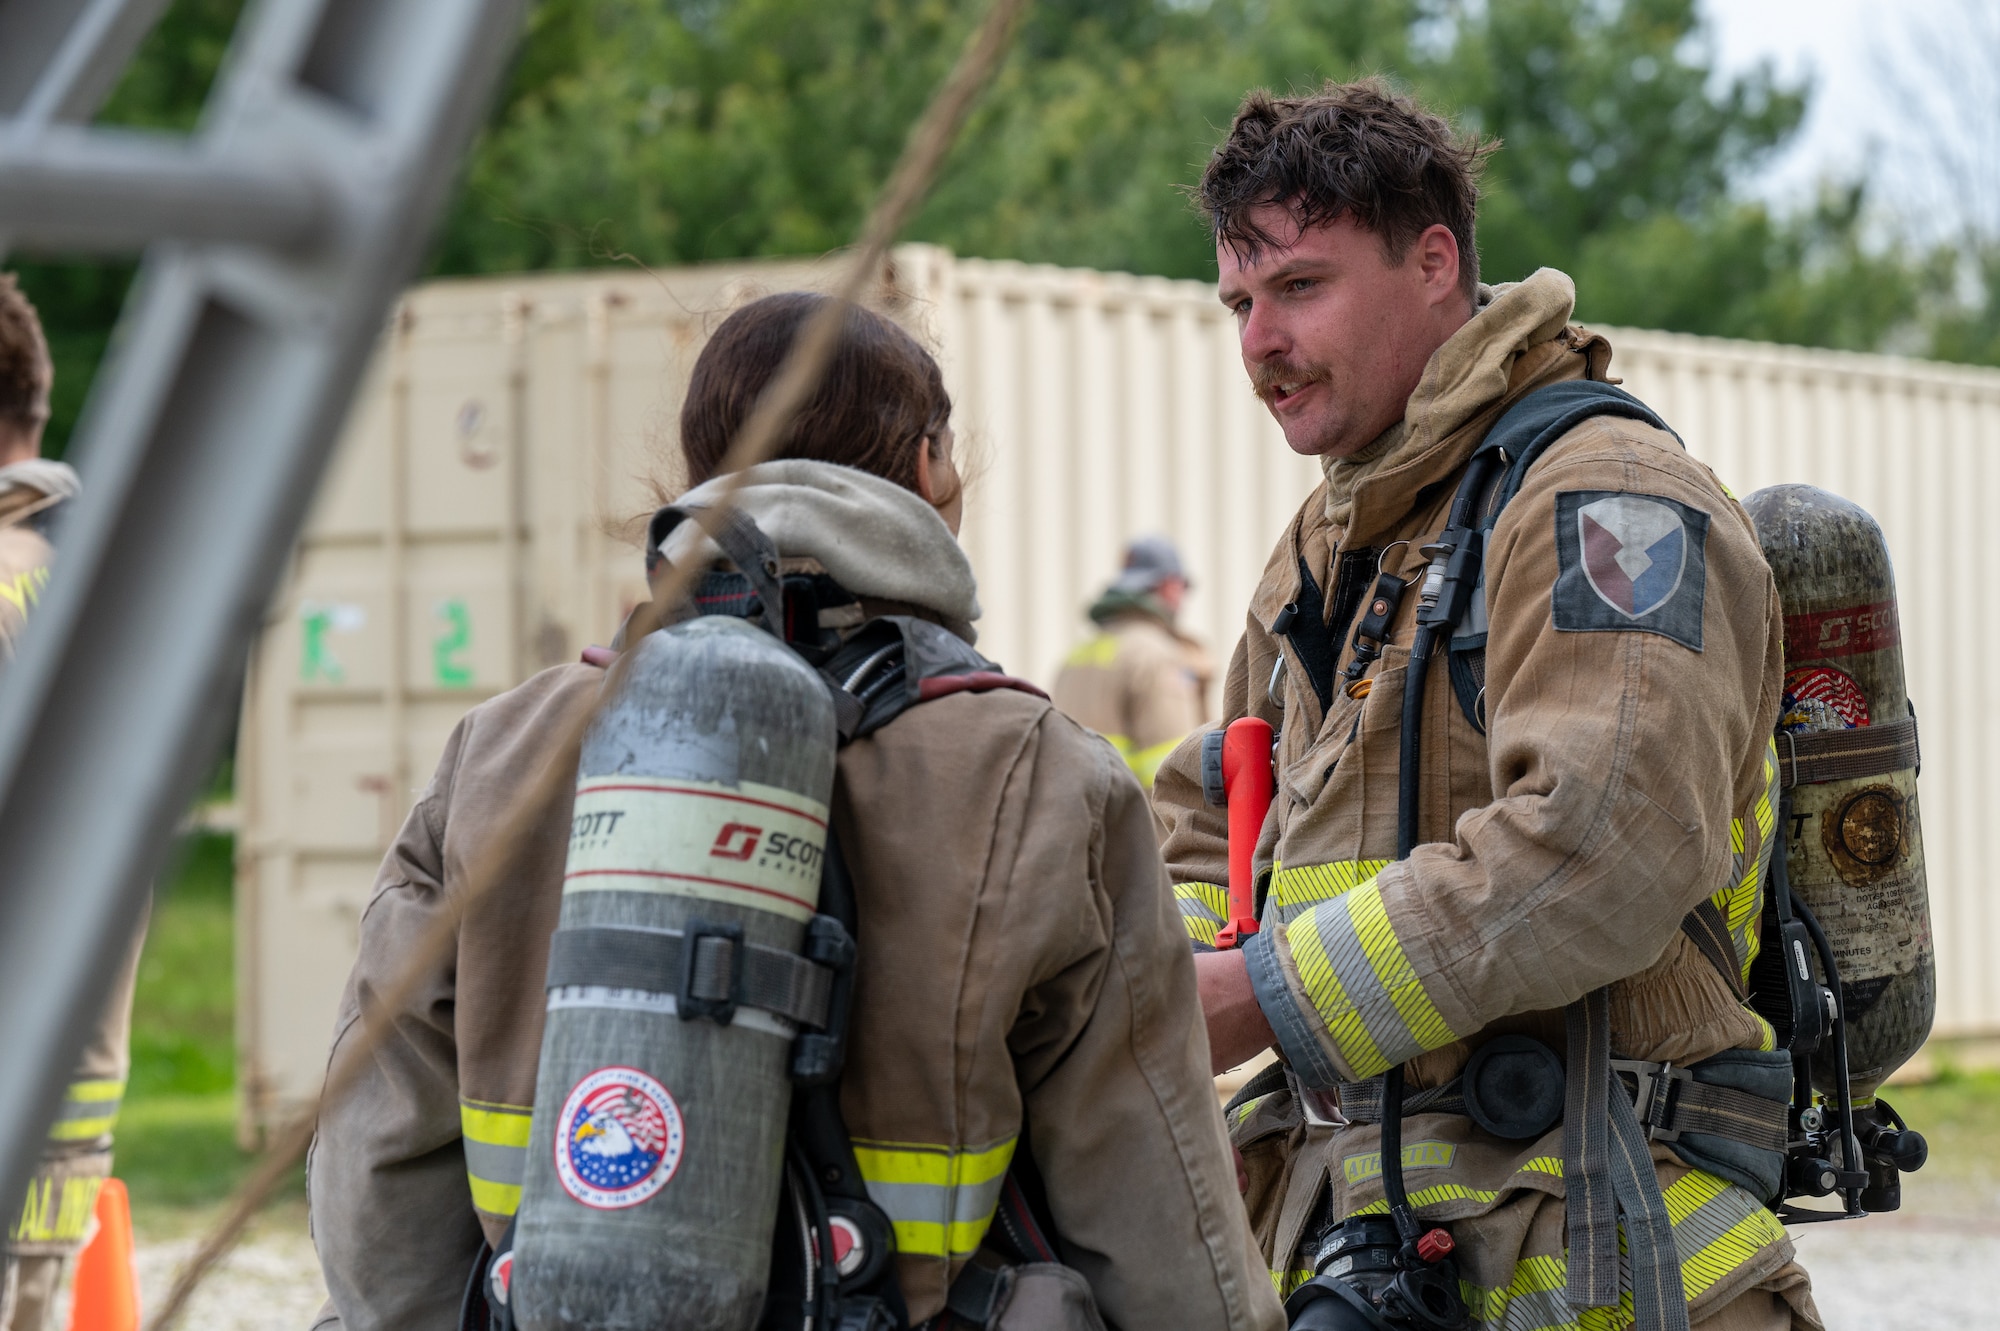 Two firefighters, in uniform, having a conversation. In the background, a shipping container. Framing the photo at left, a glimpse of a ladder and rope.